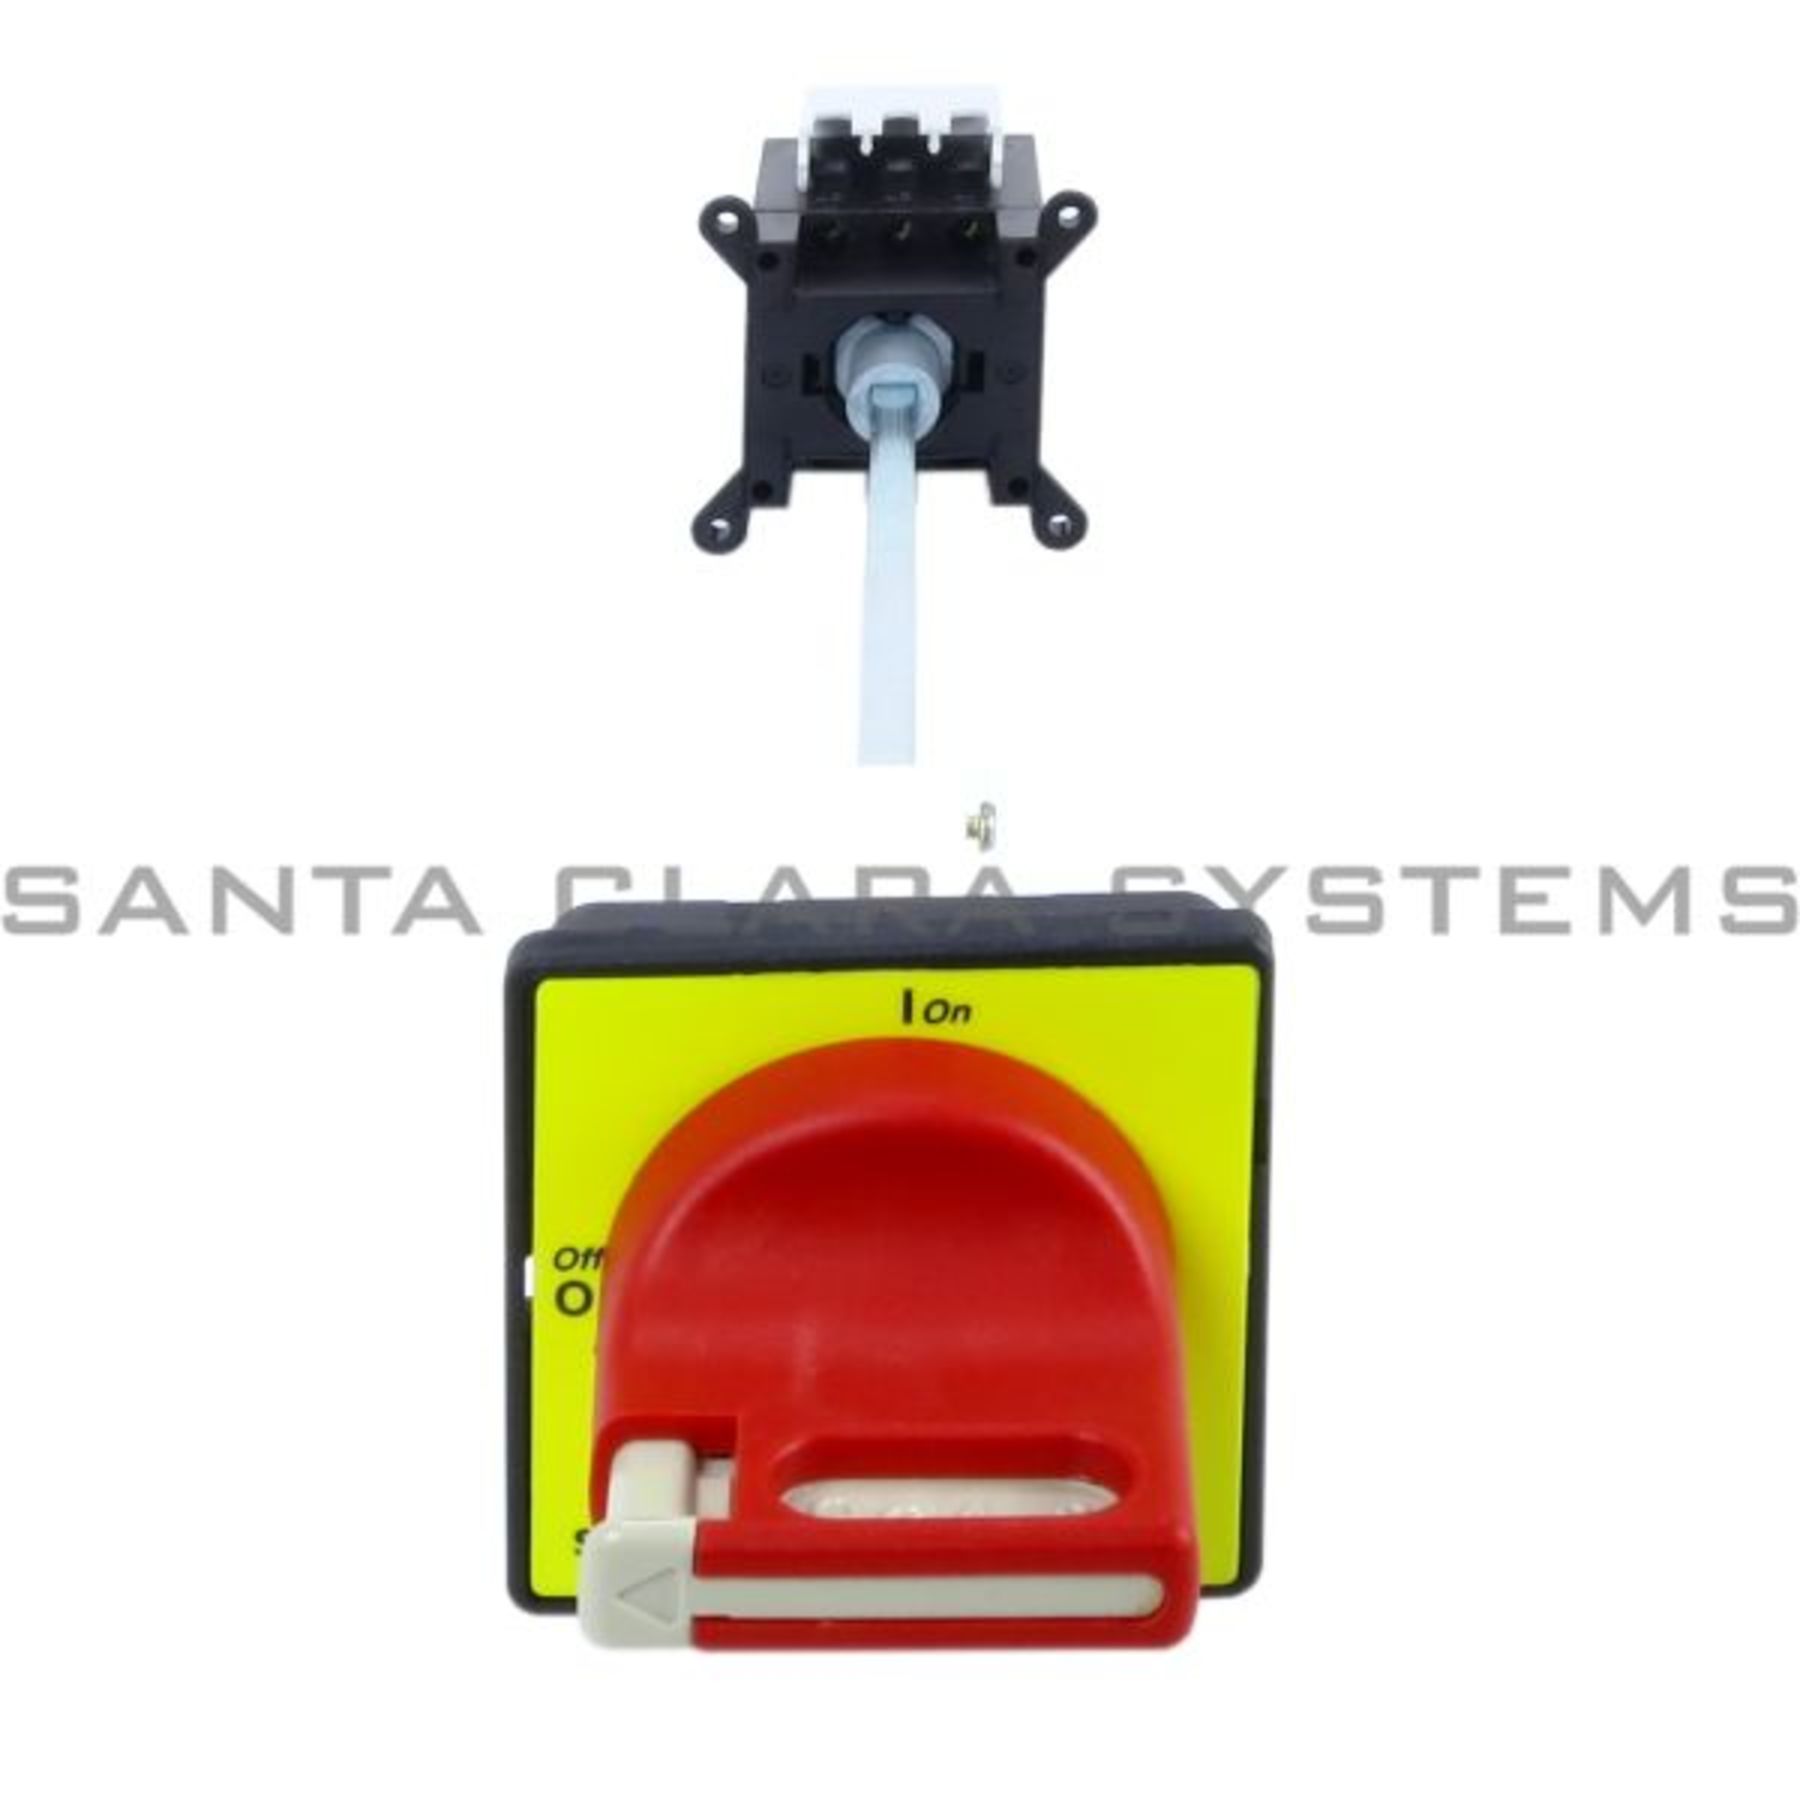 20A Emergency Stop Switch Disconnector Schneider Electric TeSys VARIO VCCF01 IP65 Rated for Mounting at Back of Enclosure 3NO Padlockable Operating Handle 3 Pole